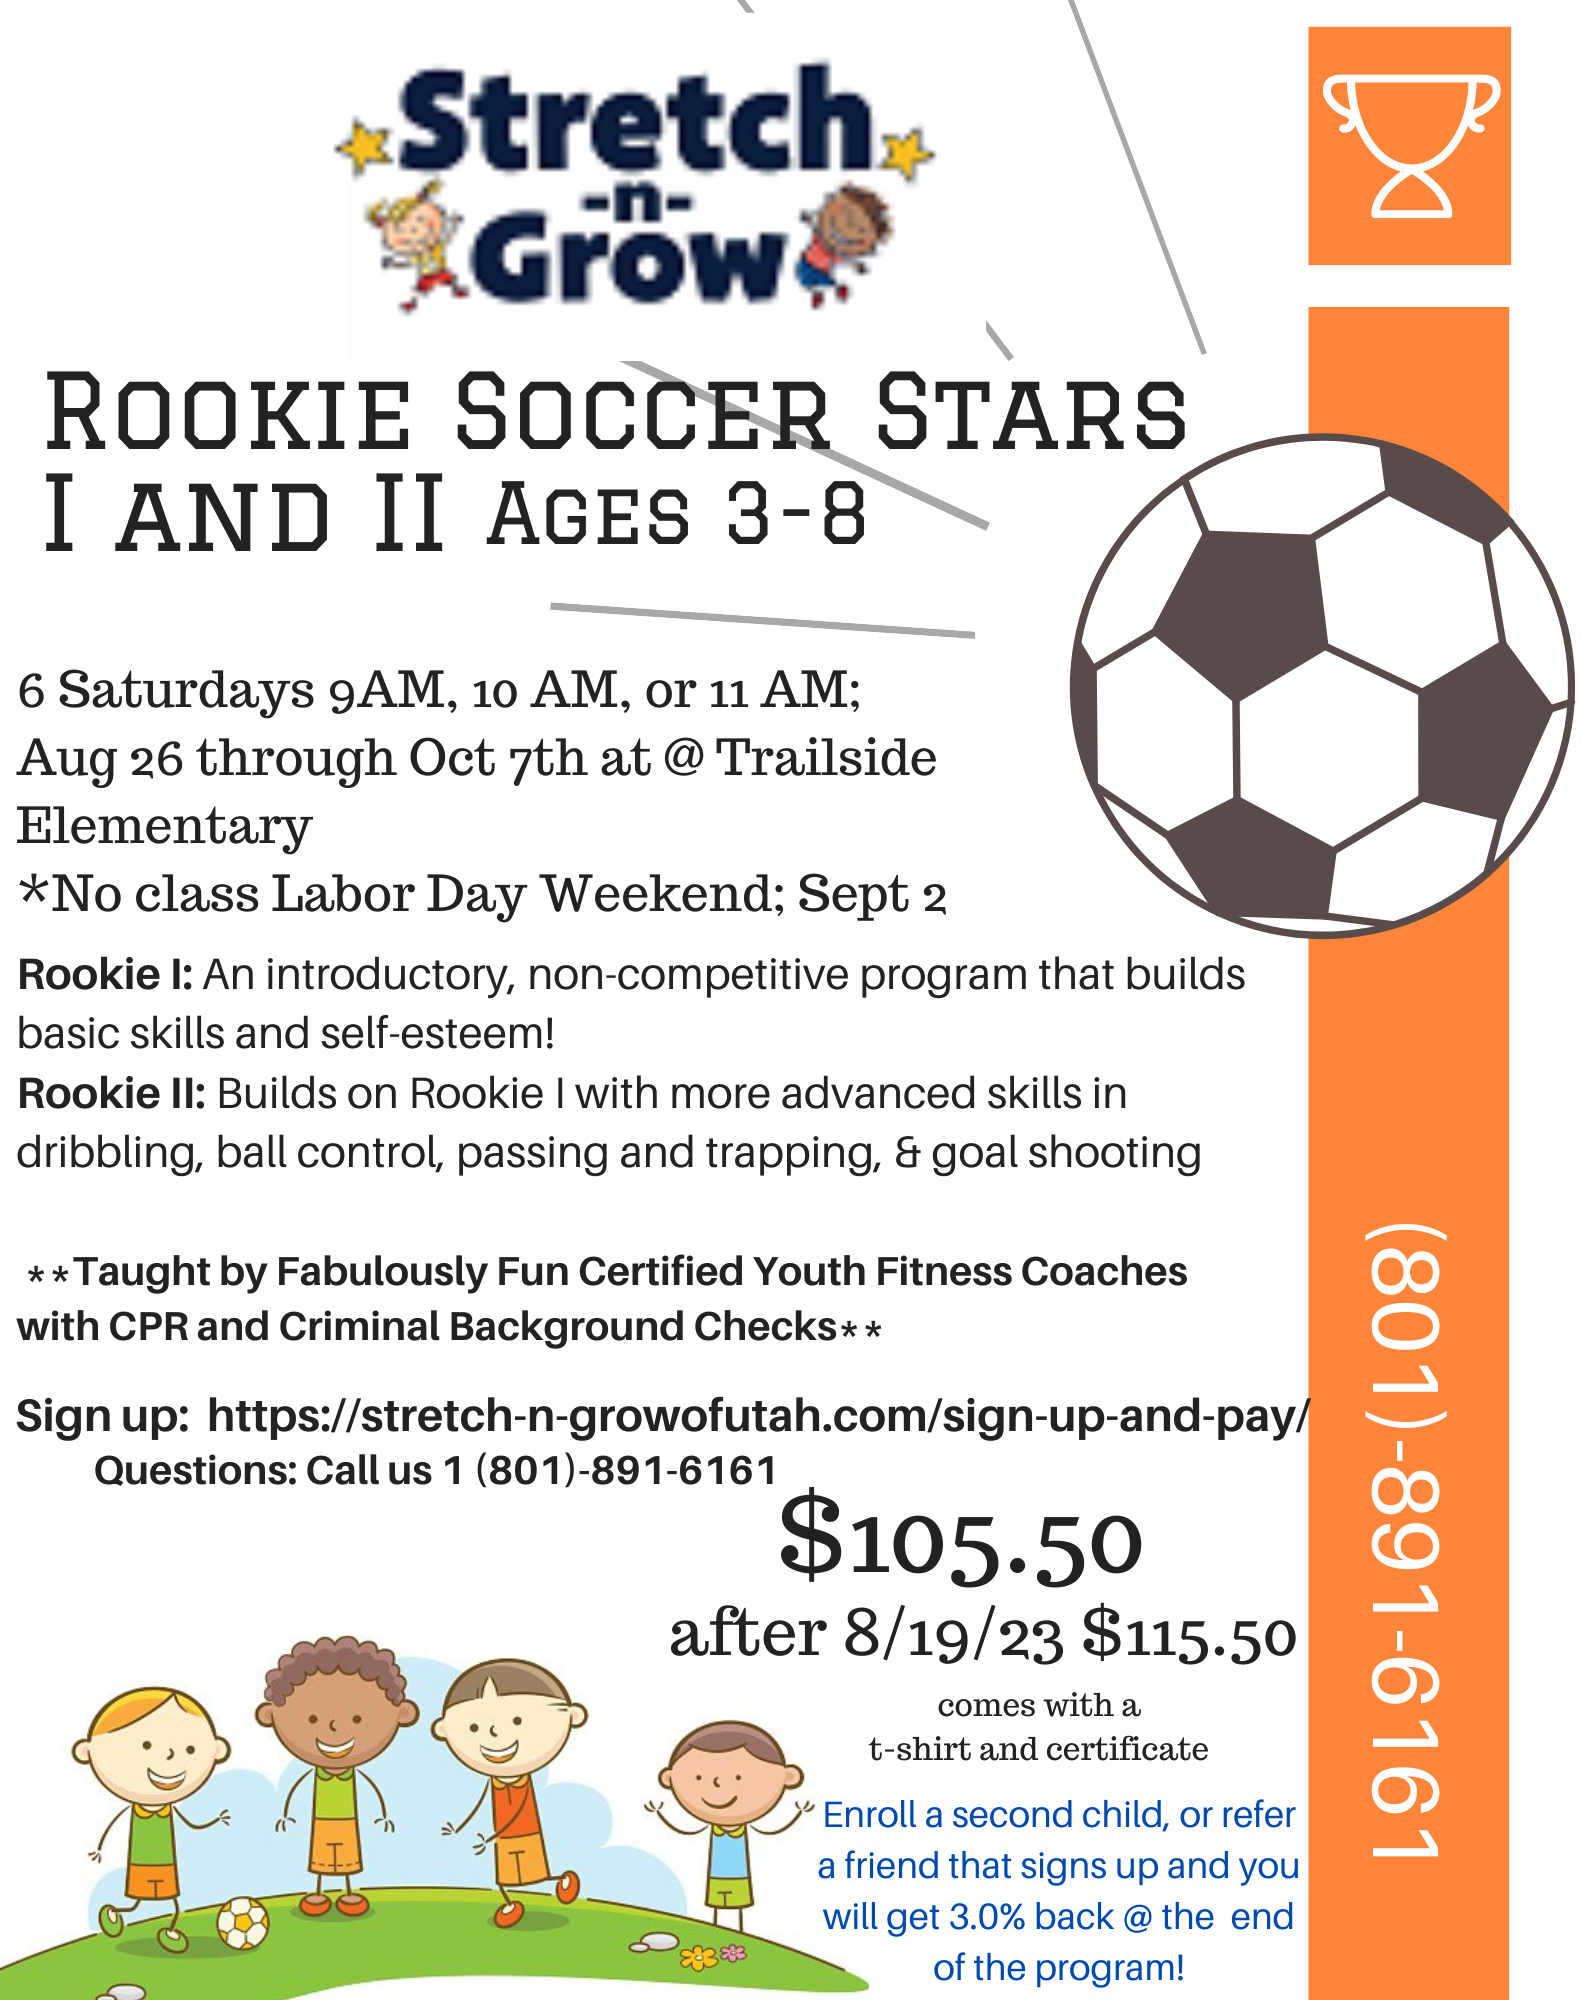 Fall 2023 flyer for Rookie Soccer 1 and 2 in Park City